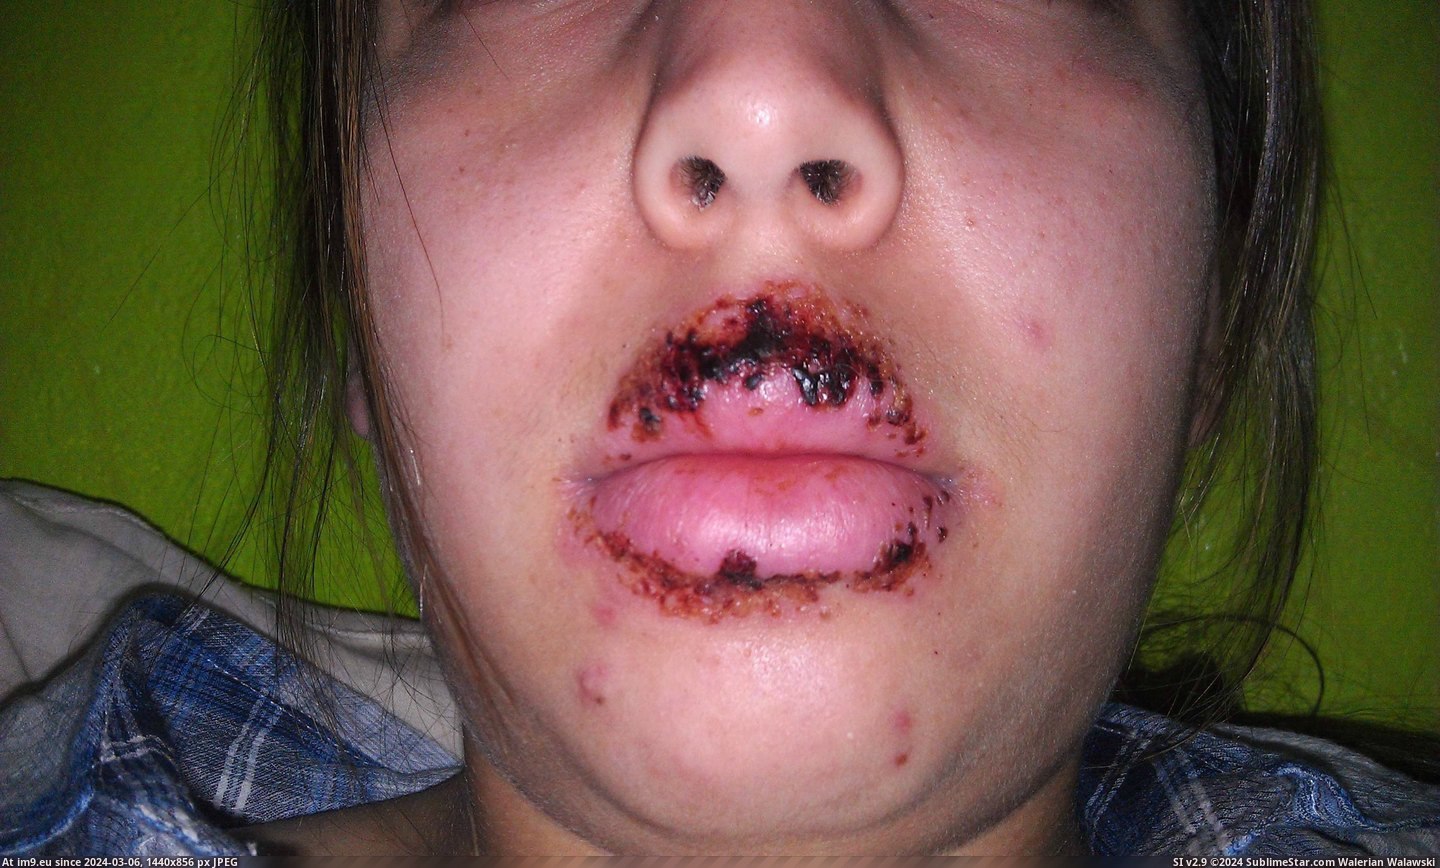 #Wtf #Face #Screw #Disorder #Sore #Cold #Weeks [Wtf] The Cold Sore(s) that took over my face for 2 weeks. [NSFW] Don't screw with an Autoimmune Disorder 5 Pic. (Bild von album My r/WTF favs))